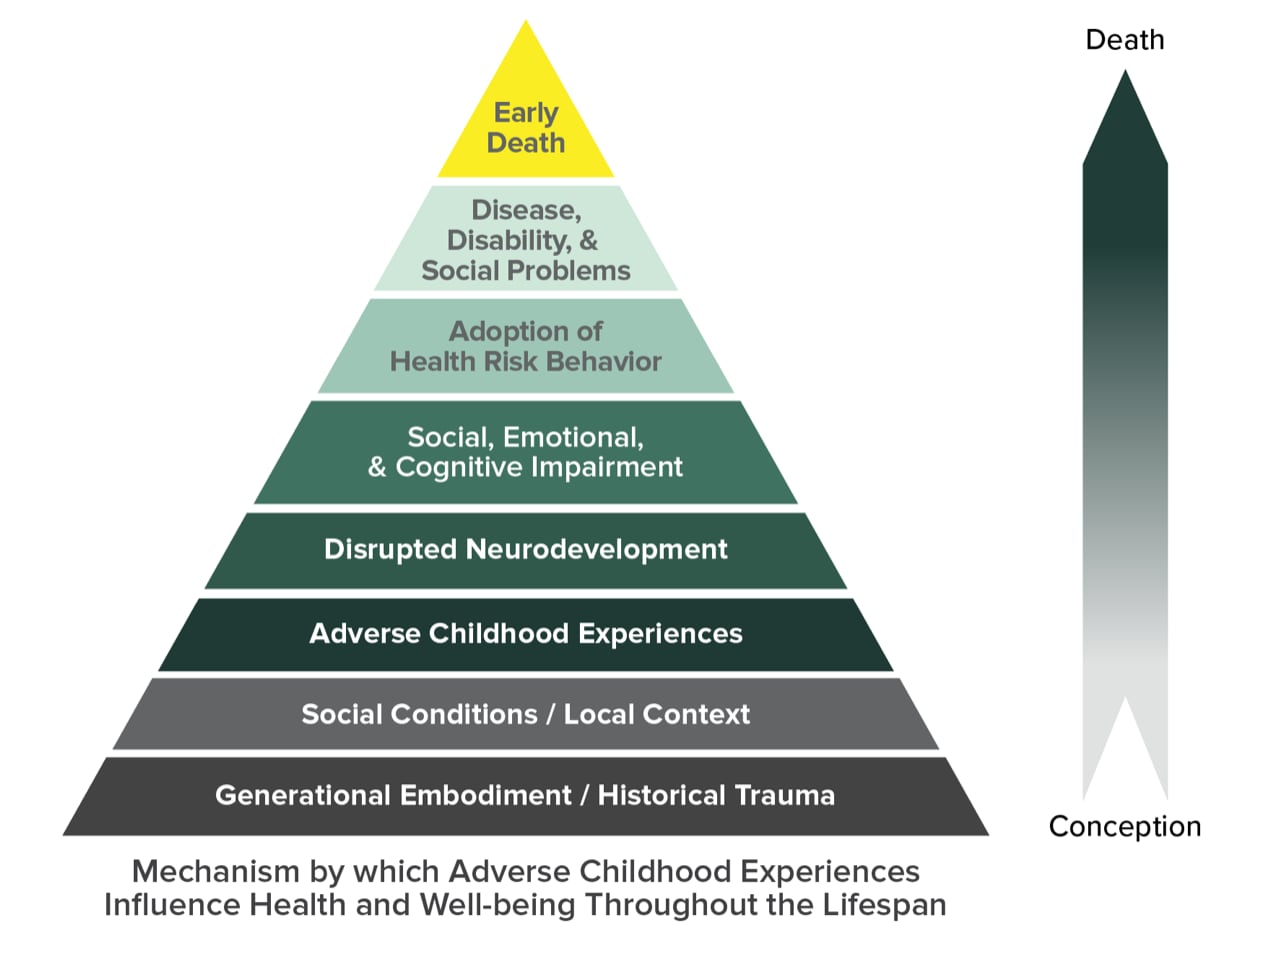 ACE Pyramid represents the conceptual framework for the ACE Study